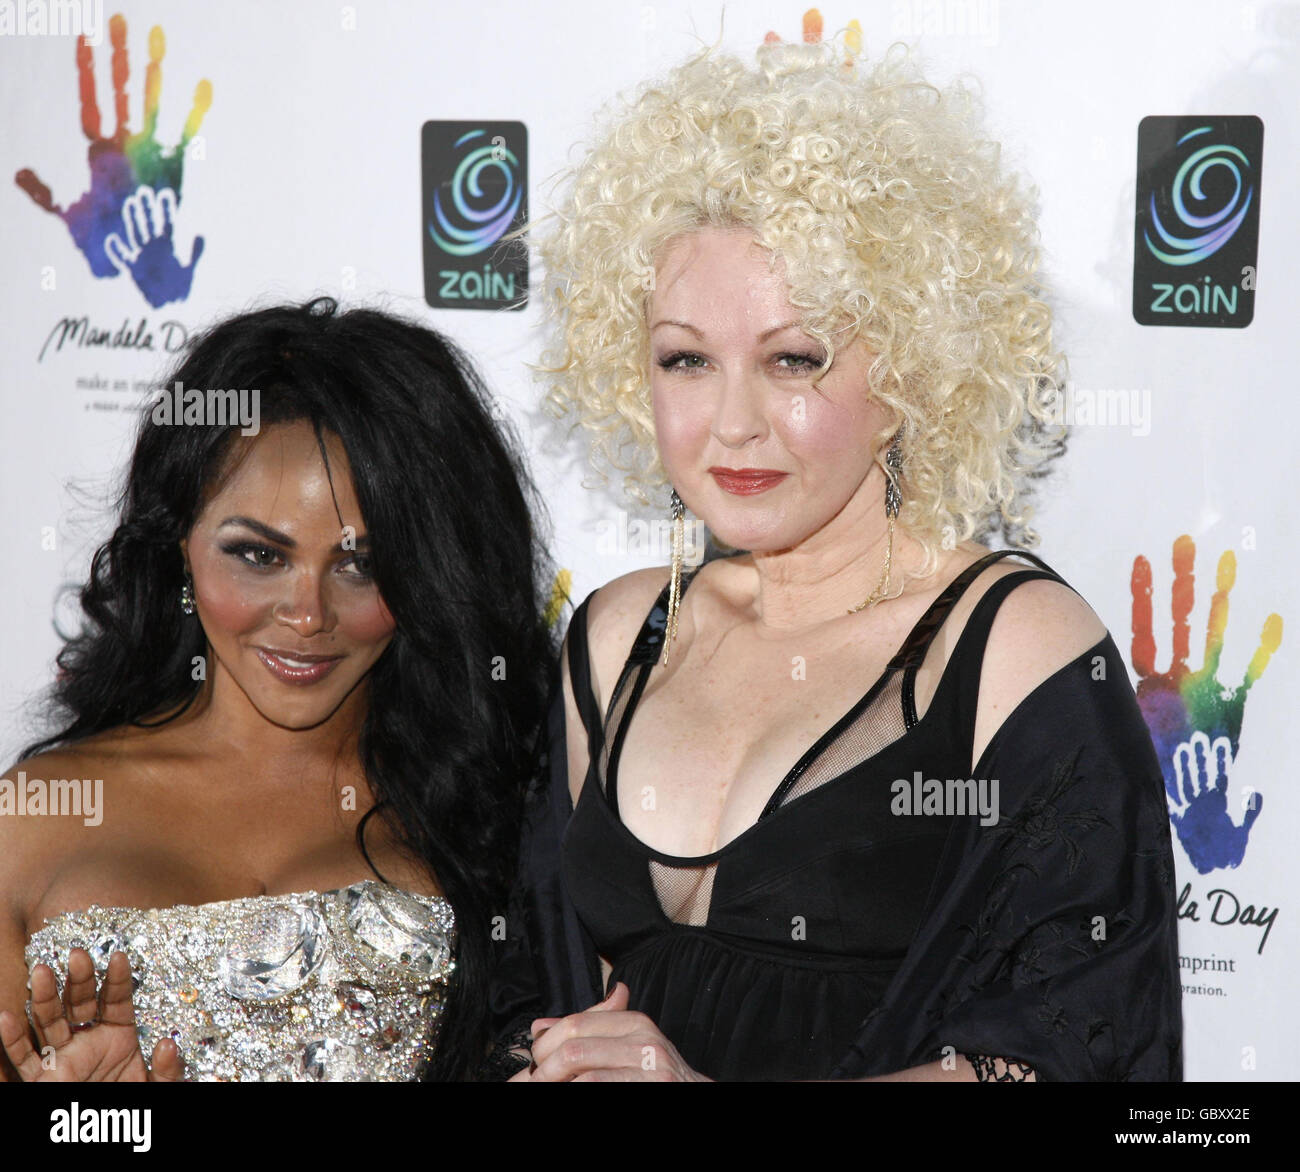 Singers Lil' Kim and Cyndi Lauper, right, attend the Mandela Day: A 46664 Celebration Concert at Radio City Music Hall in New York City. Stock Photo